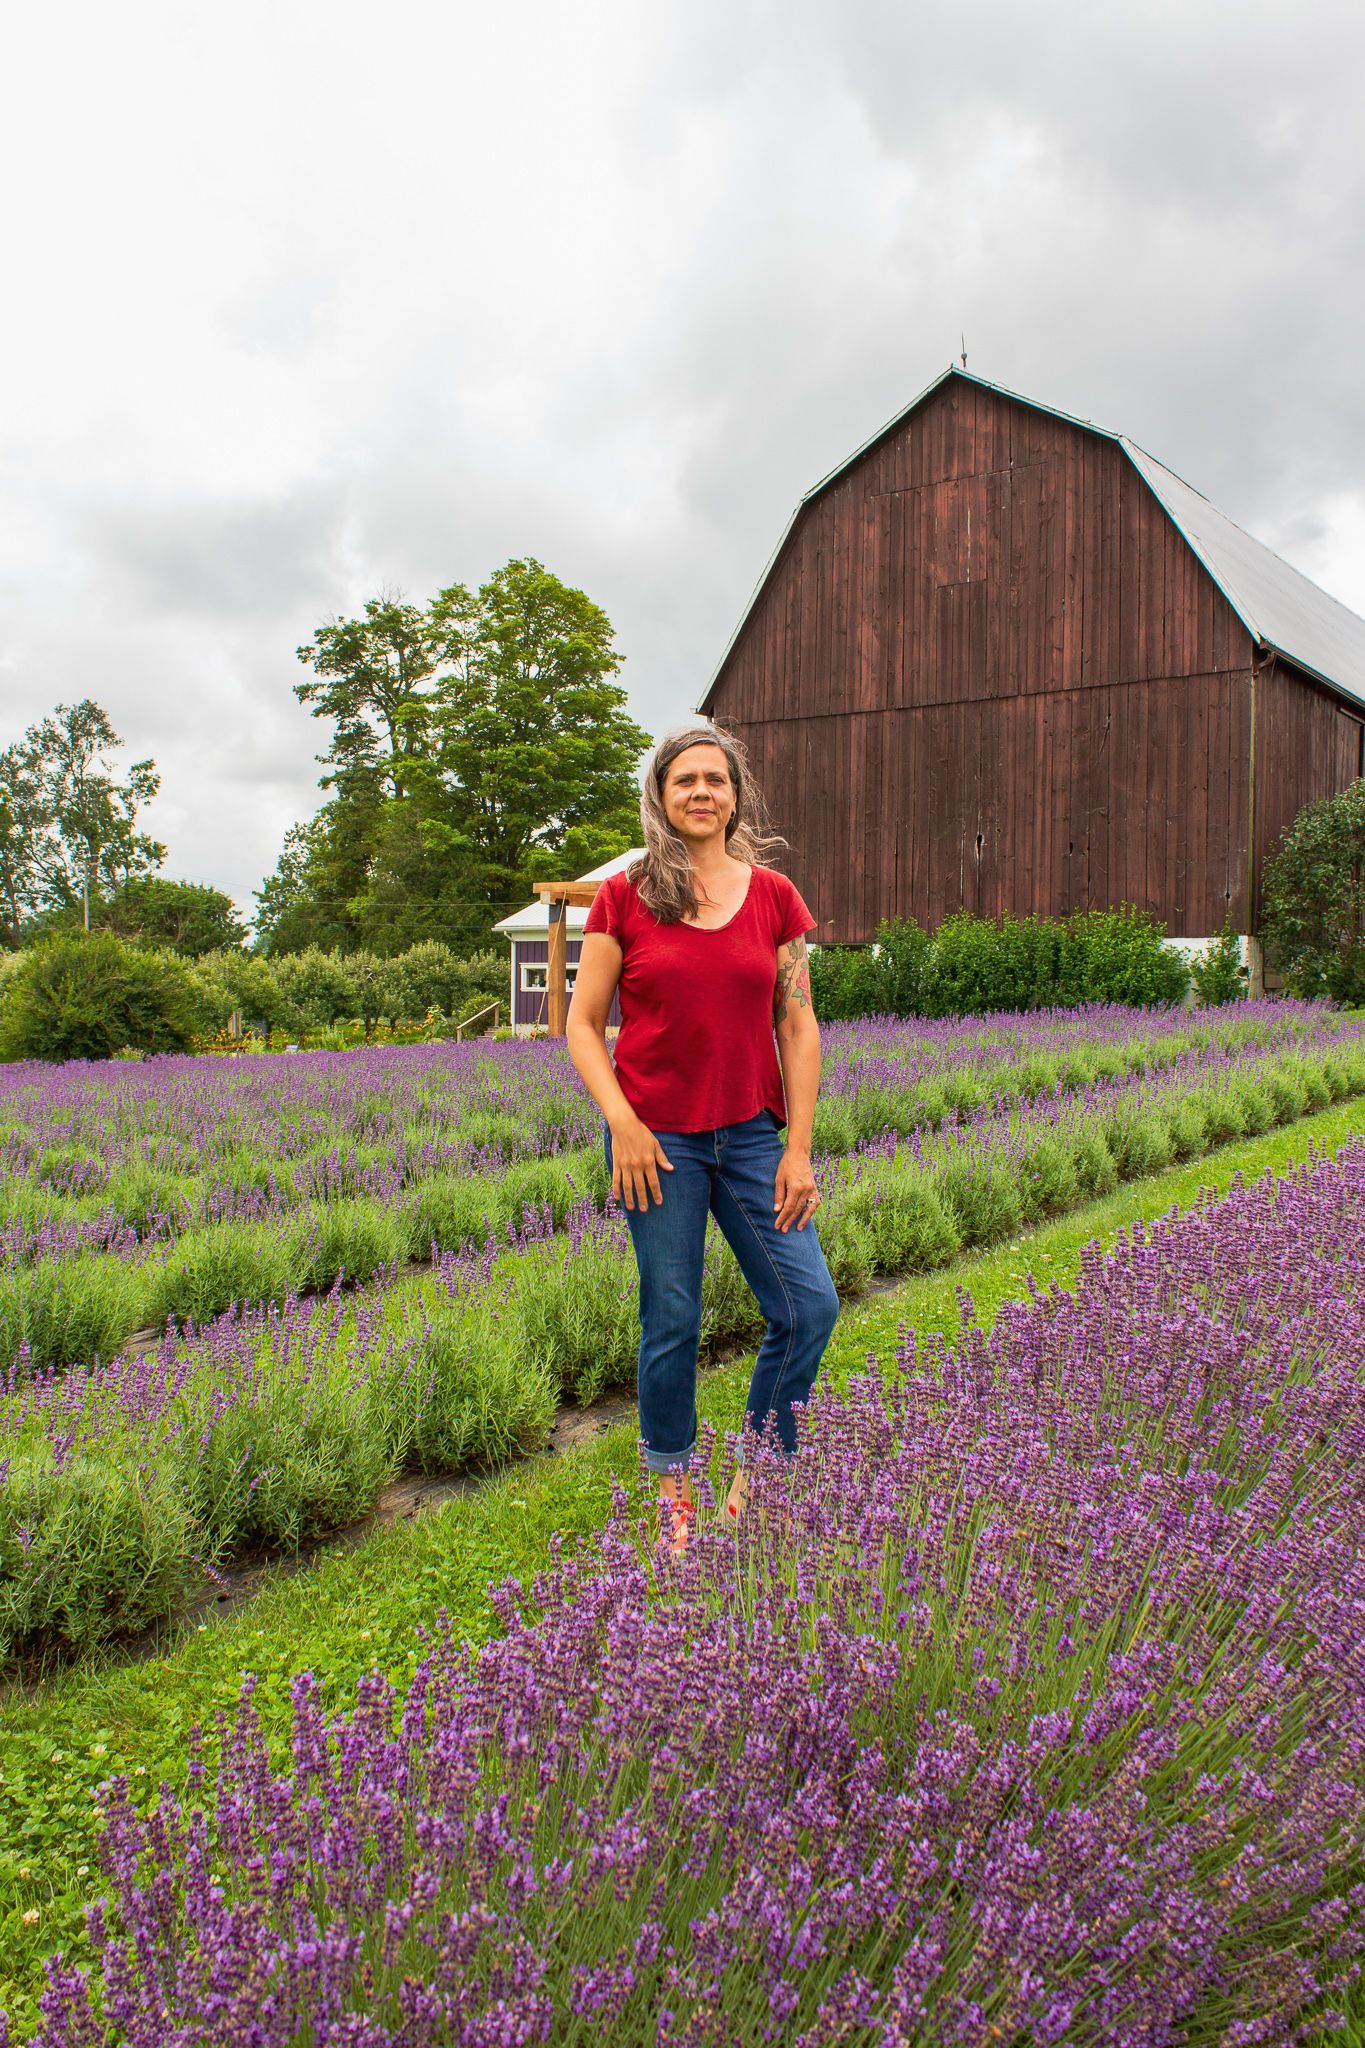 Melissa Schooley of The Raging Bowl Pottery stands in a field of lavender. Behind her is a large brown barn.